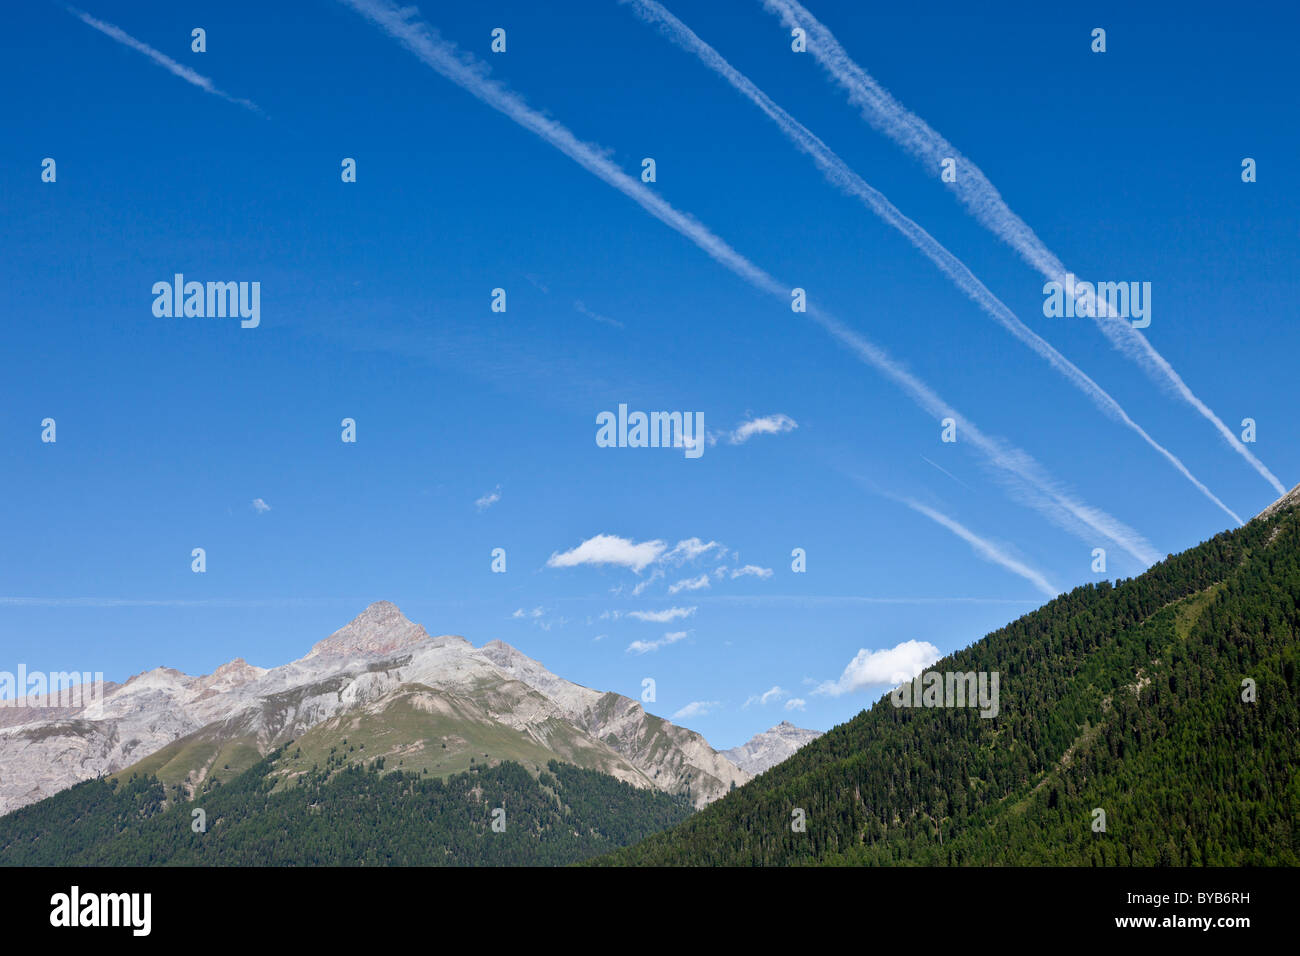 Mountain landscape with vapour trails from aircraft in the blue sky, Zuoz, Graubuenden or Grisons, Switzerland, Europe Stock Photo